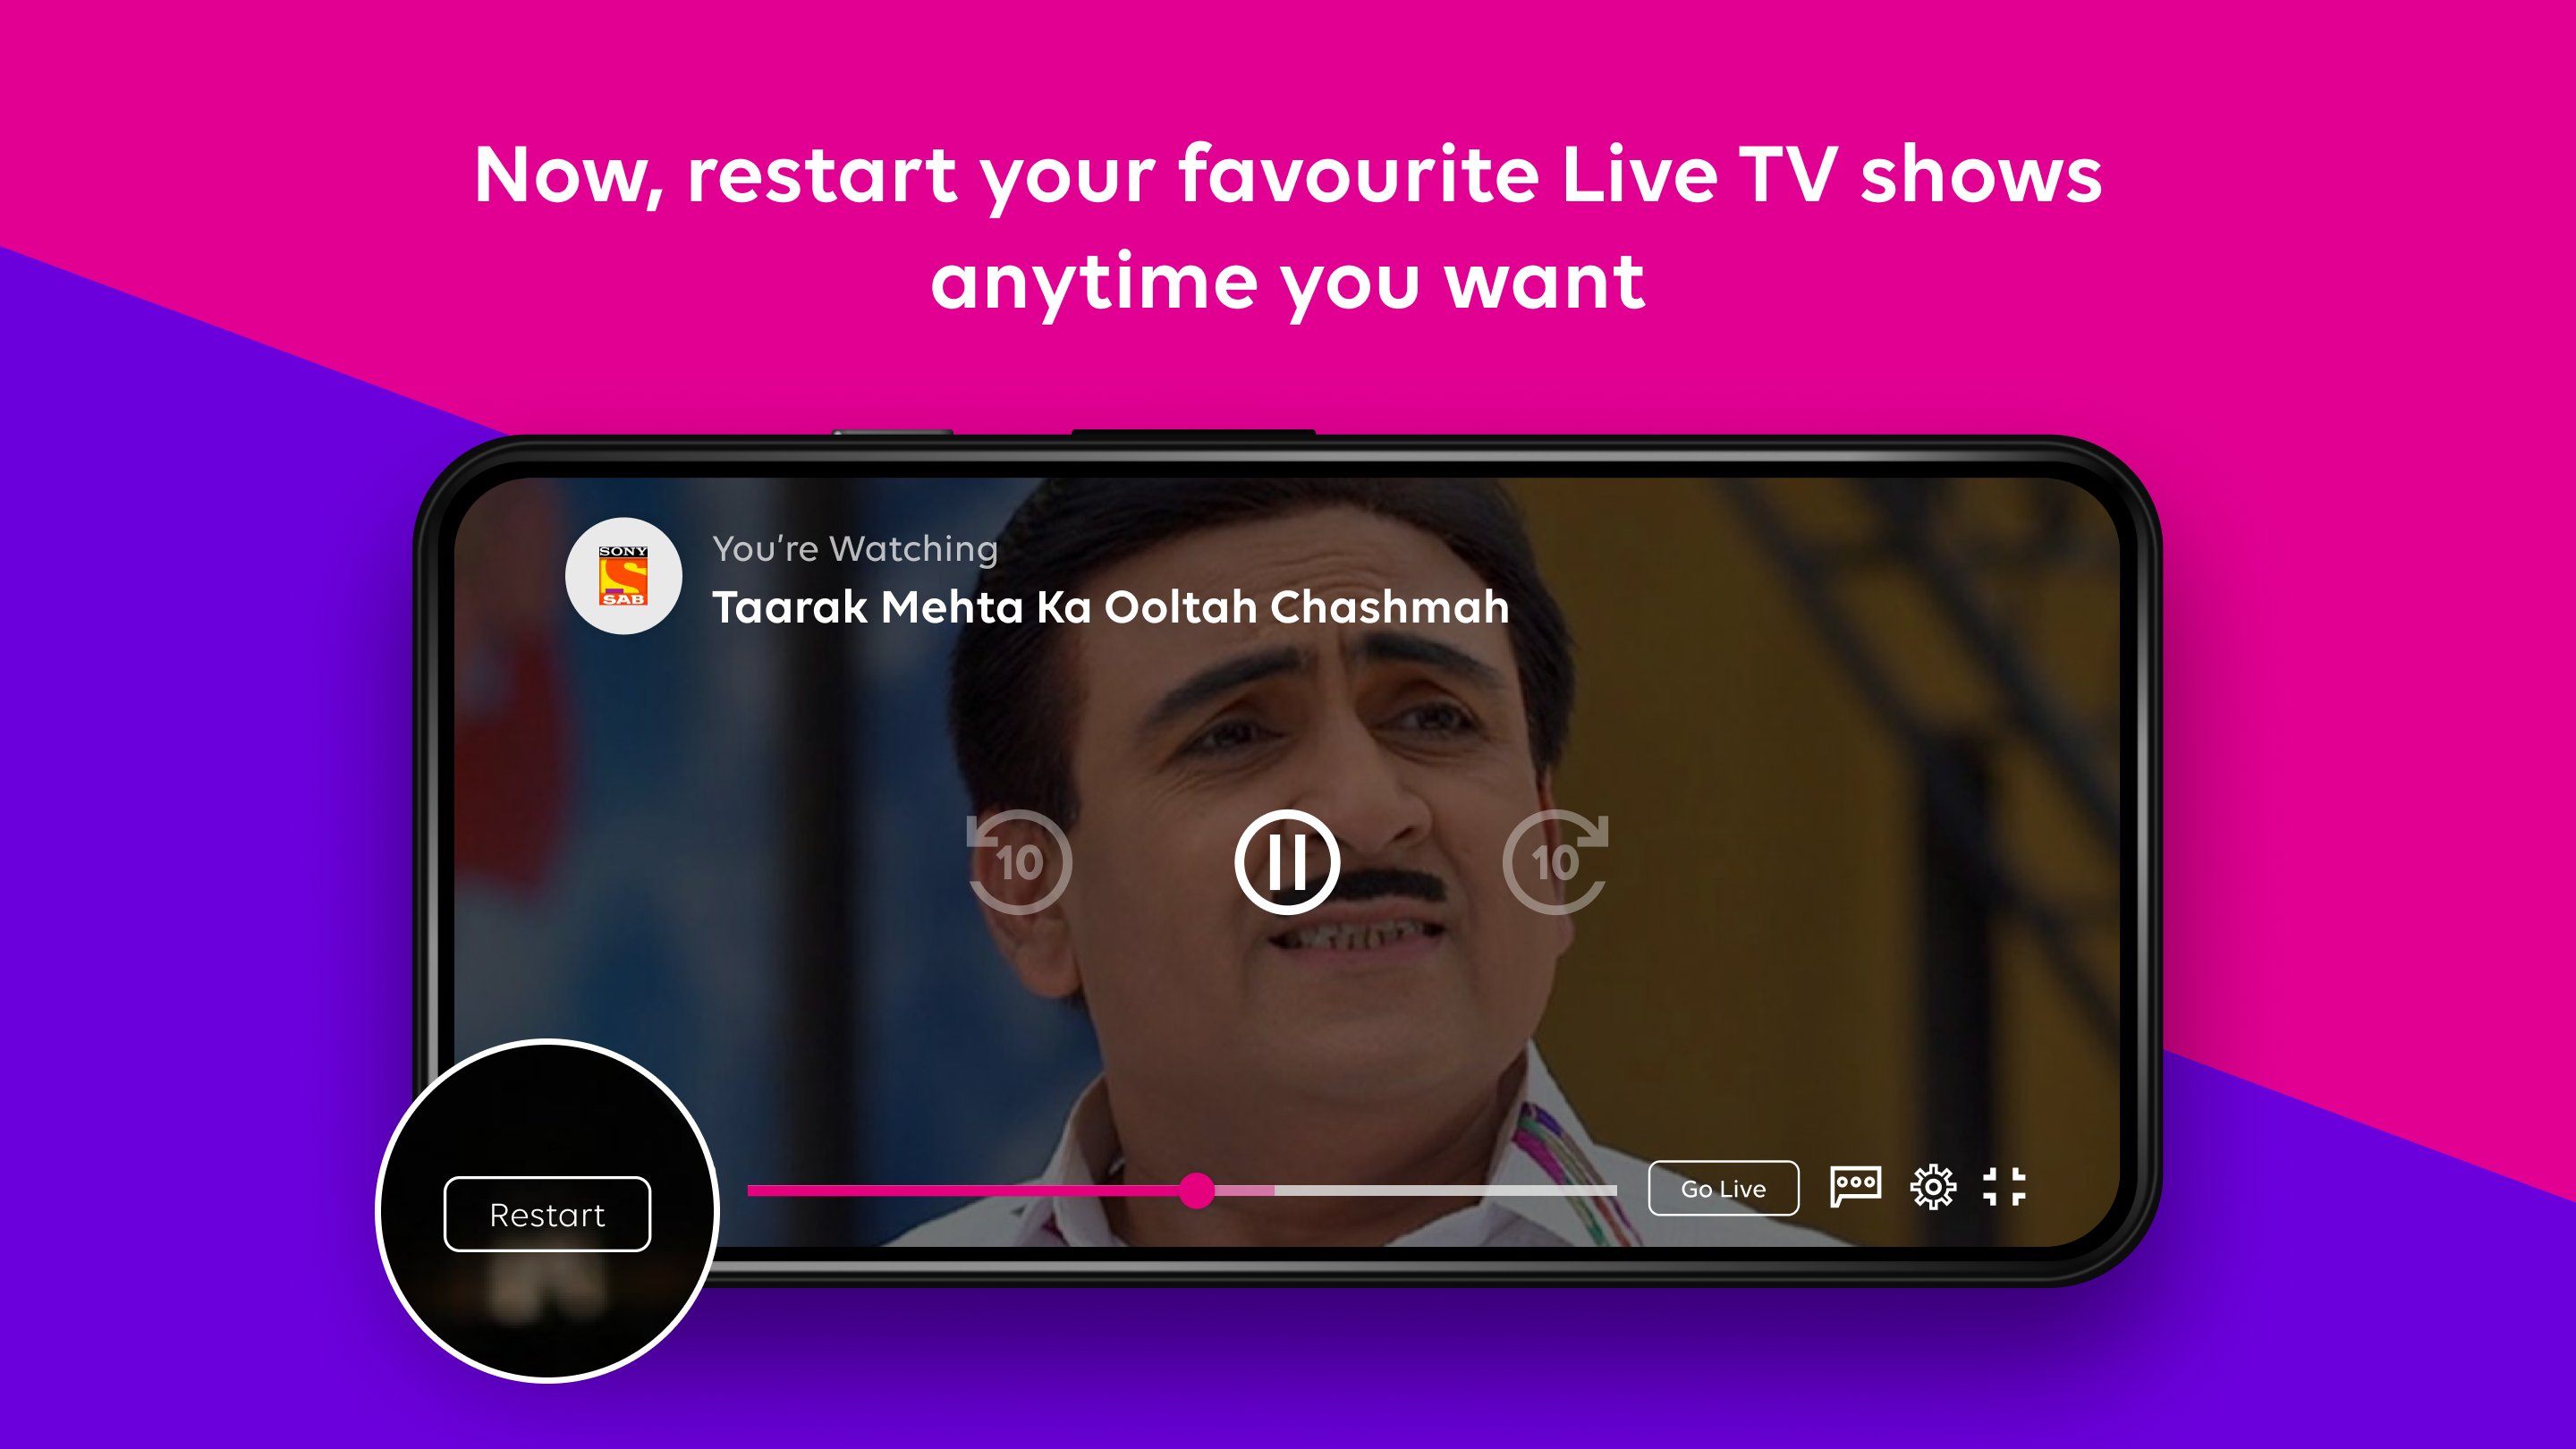 Download Tata Sky is now Tata Play APK for Android, Run on PC and Mac